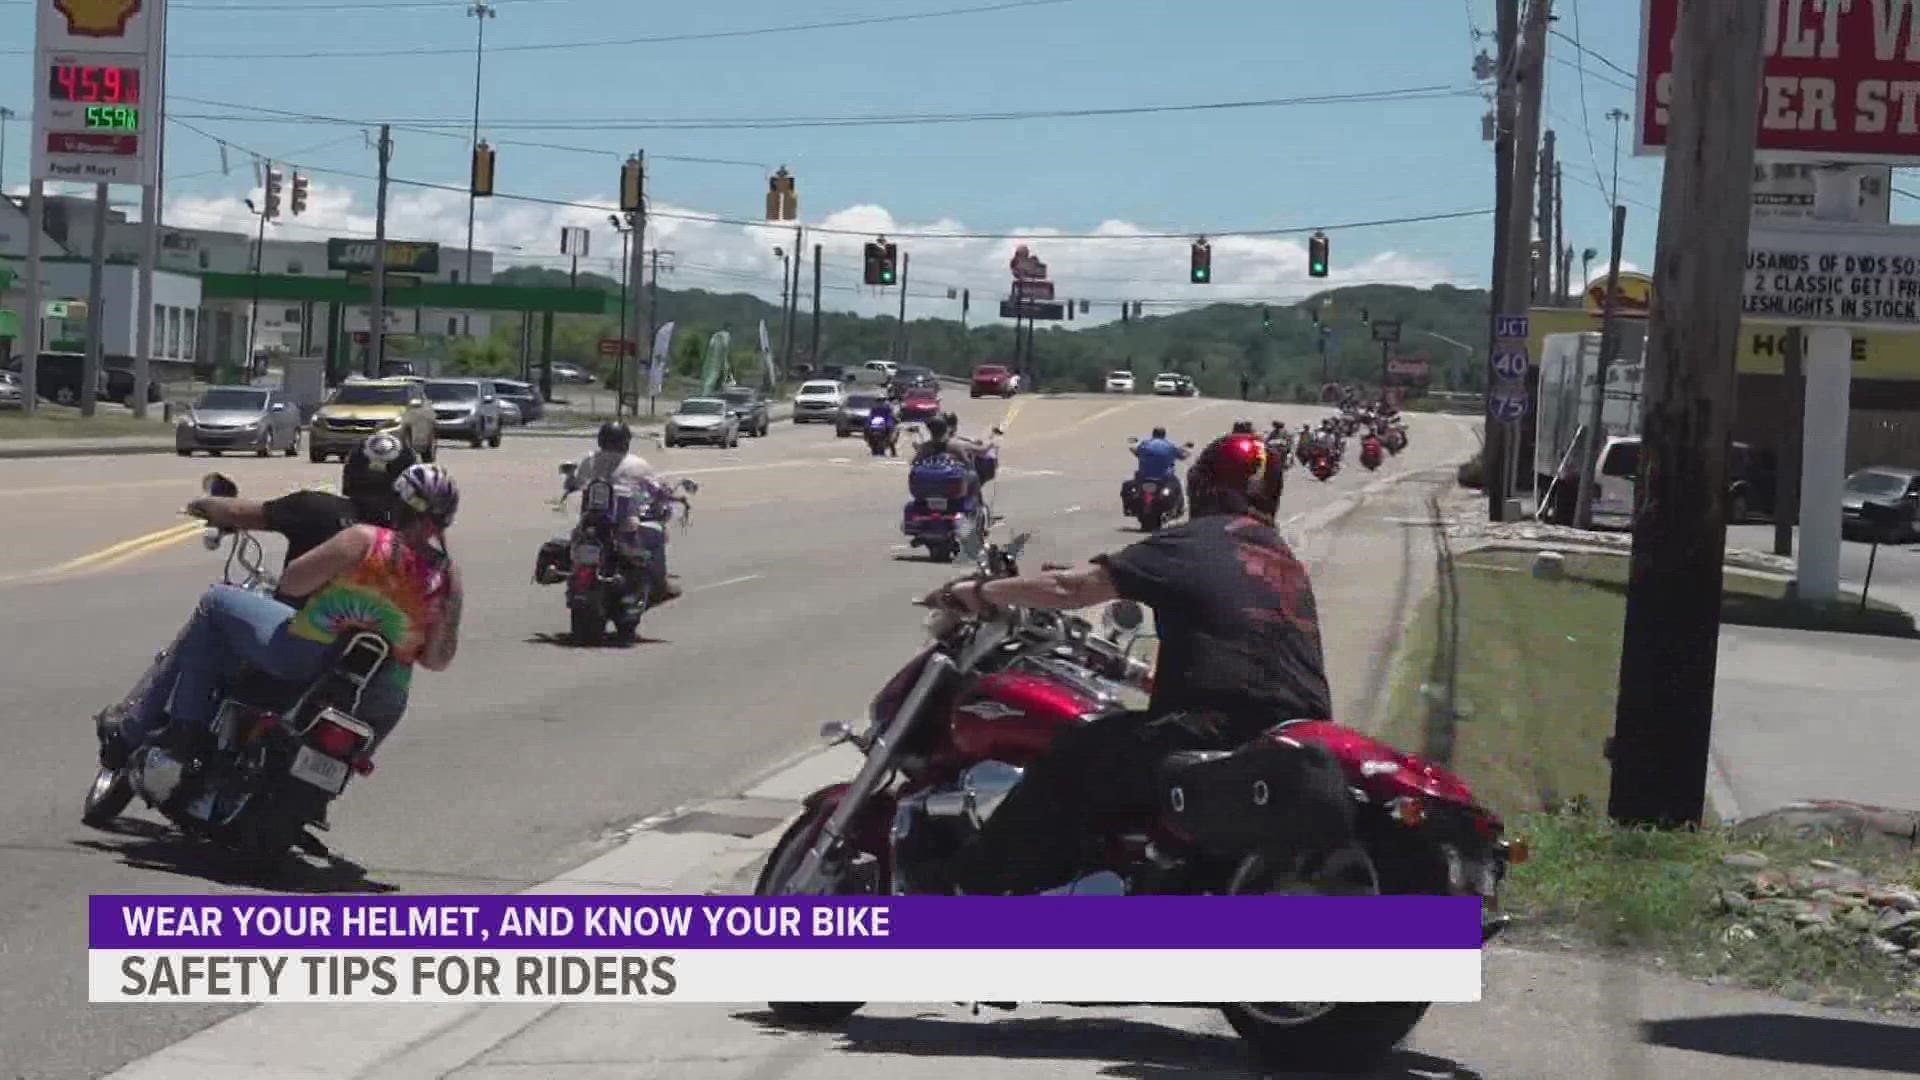 There have been almost 4,800 motorcycle crashes in Iowa since 2017.